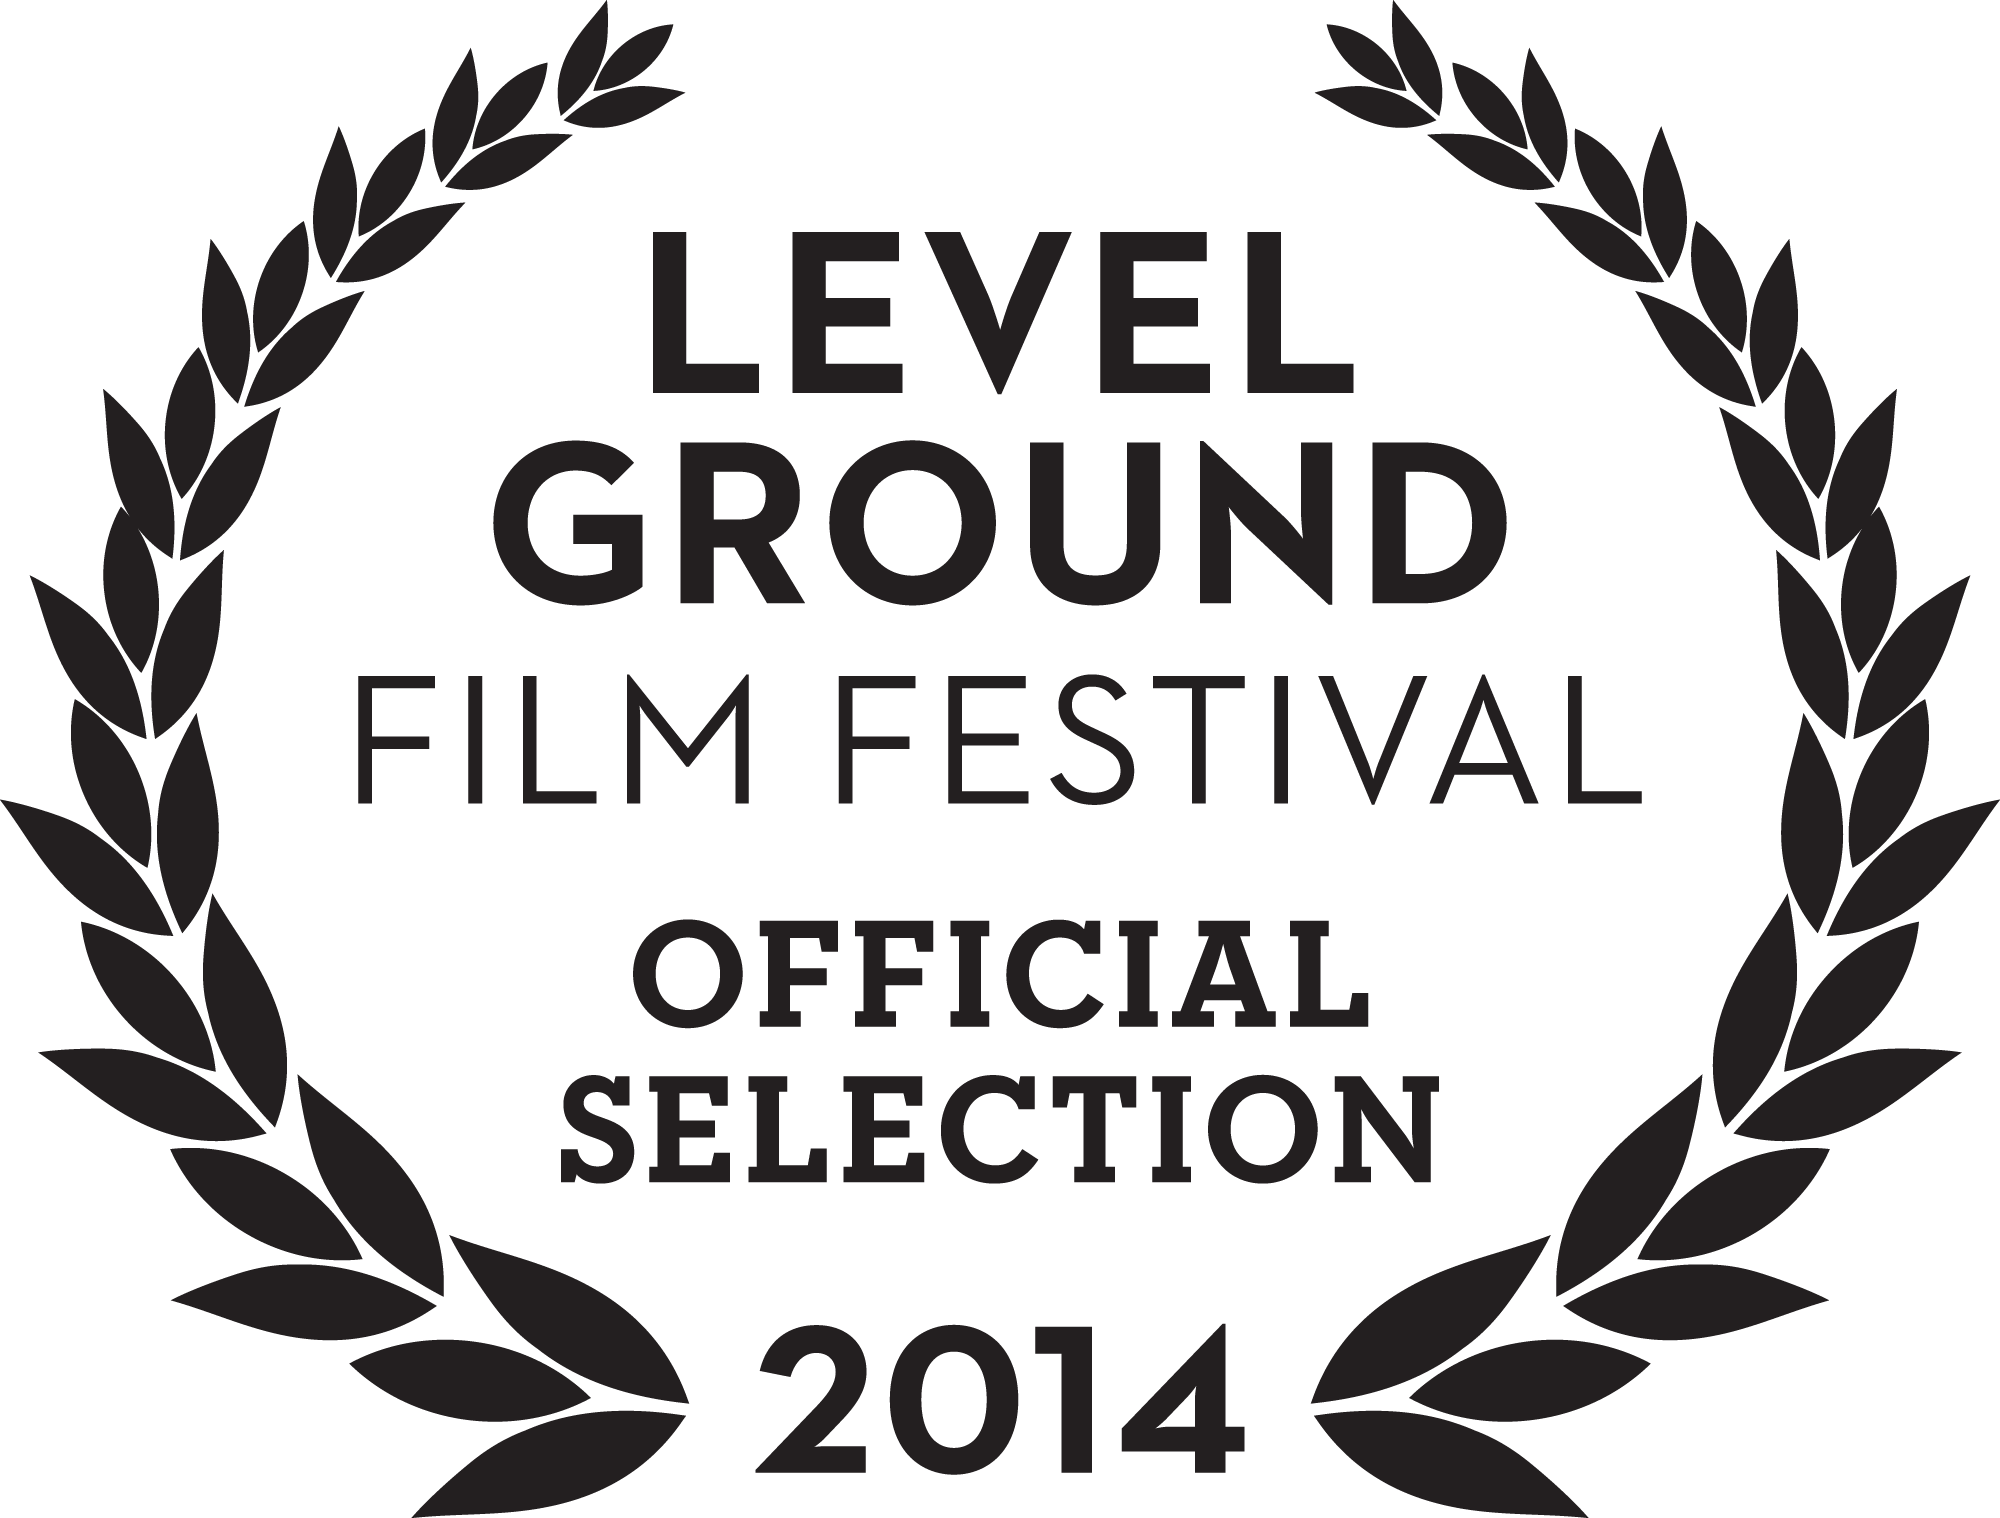 Level Ground Film Festival 2014 Official Selection